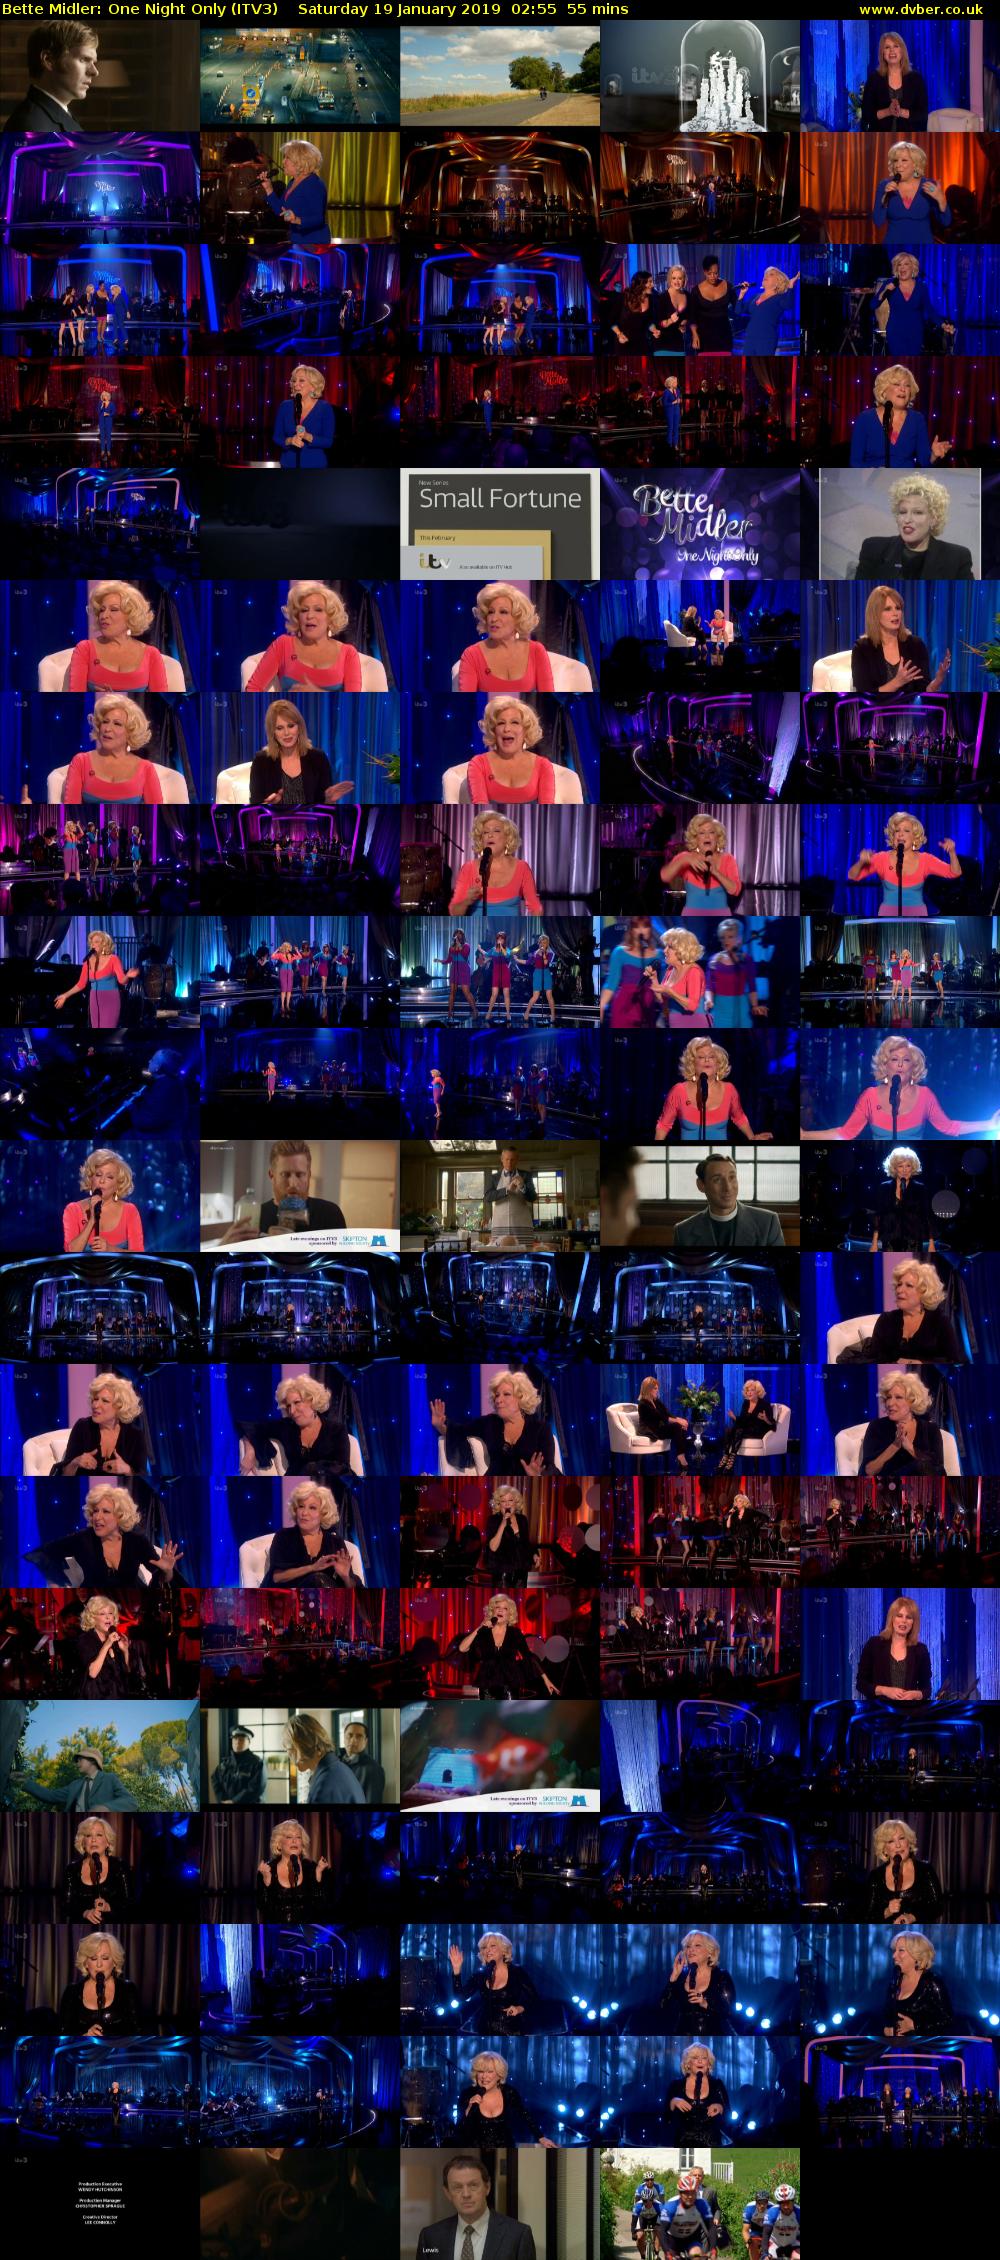 Bette Midler: One Night Only (ITV3) Saturday 19 January 2019 02:55 - 03:50